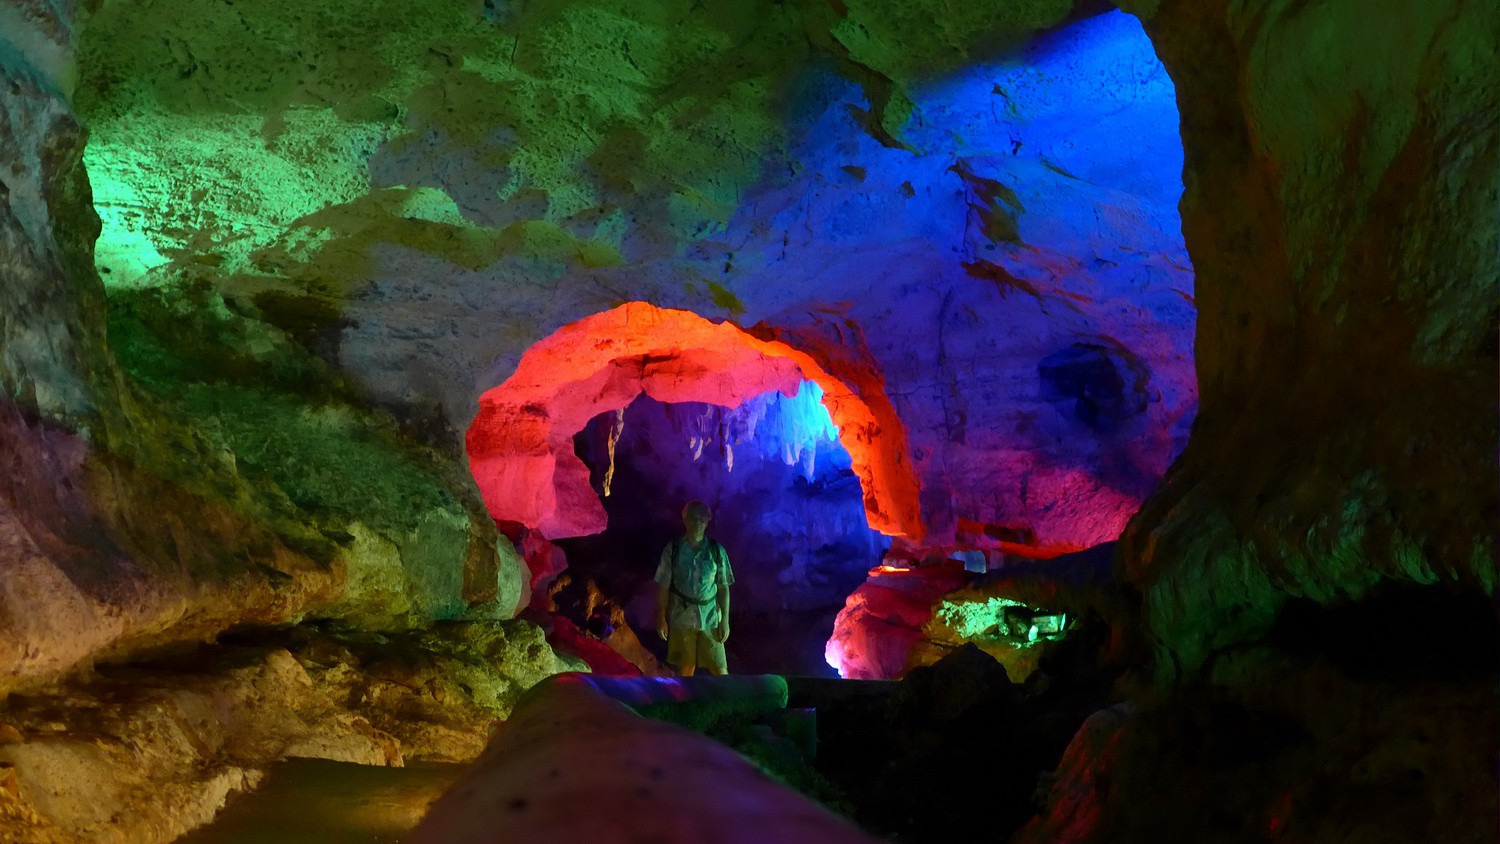 Going into one of the caves Grutas de X'Tacumbilzuna'an with colorful illumination